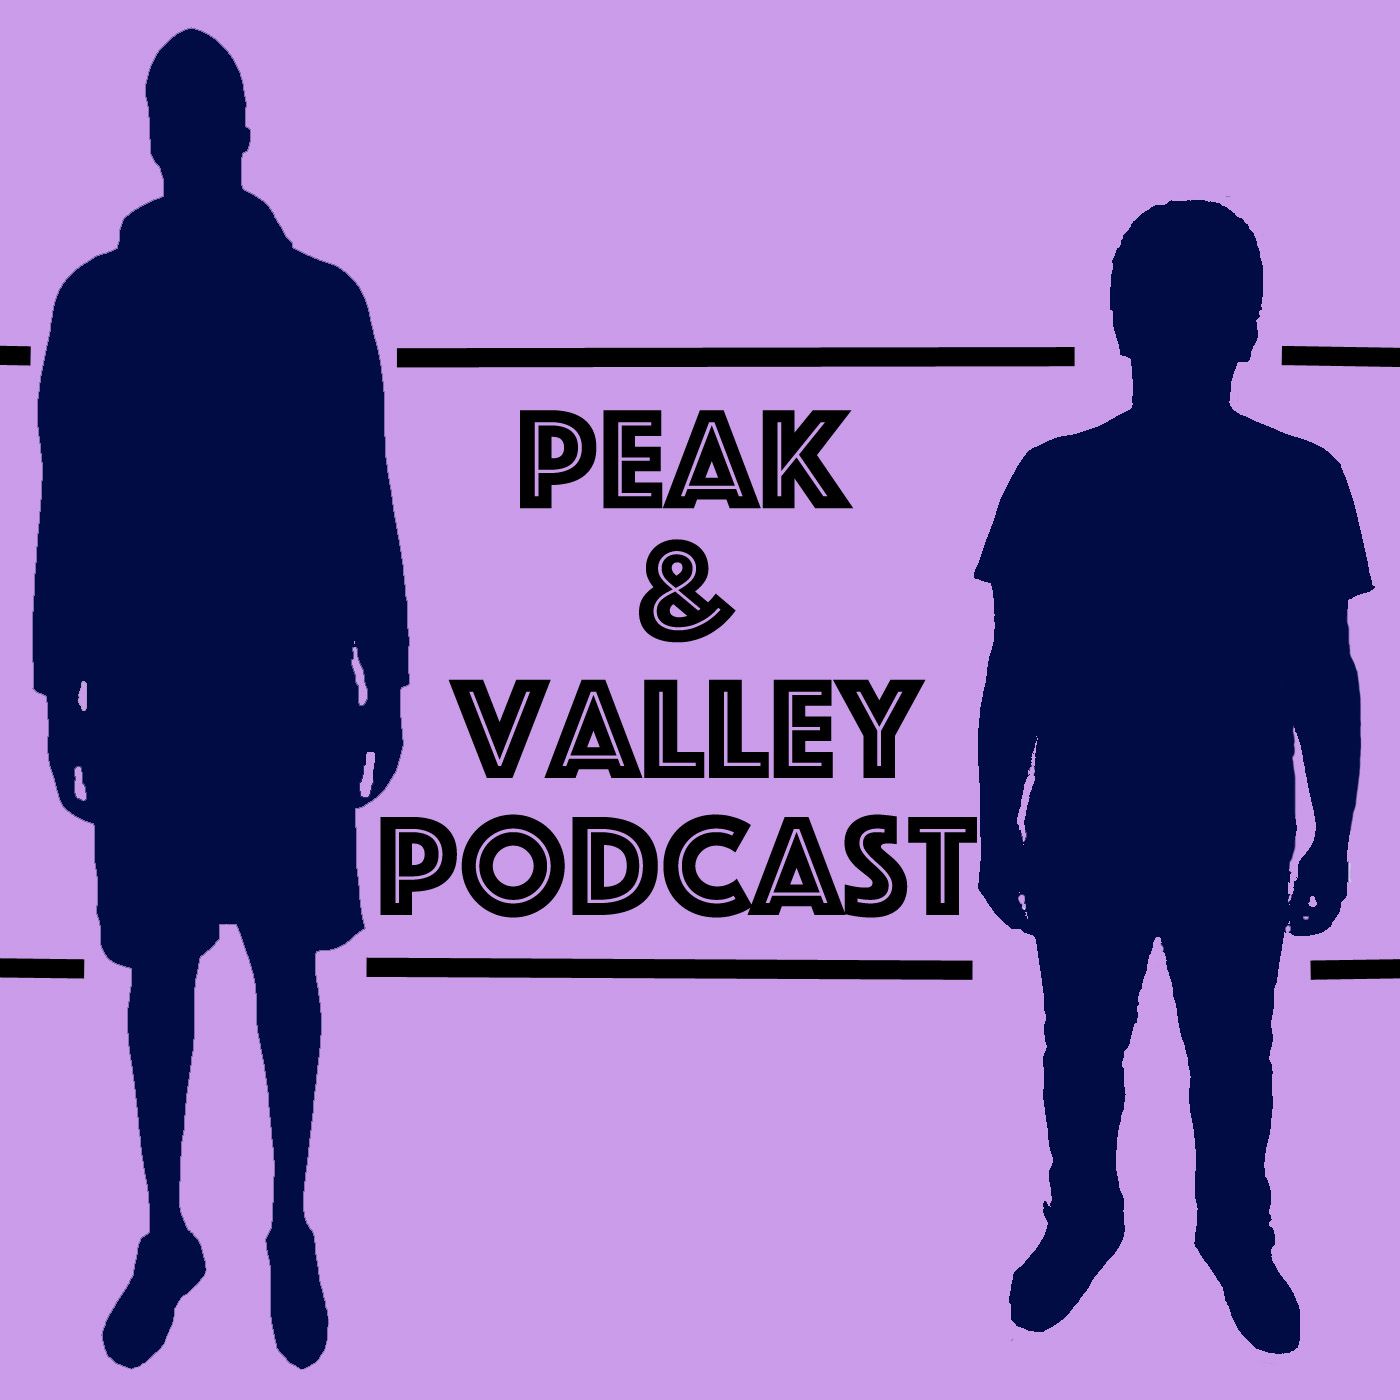 Peak and Valley Podcast